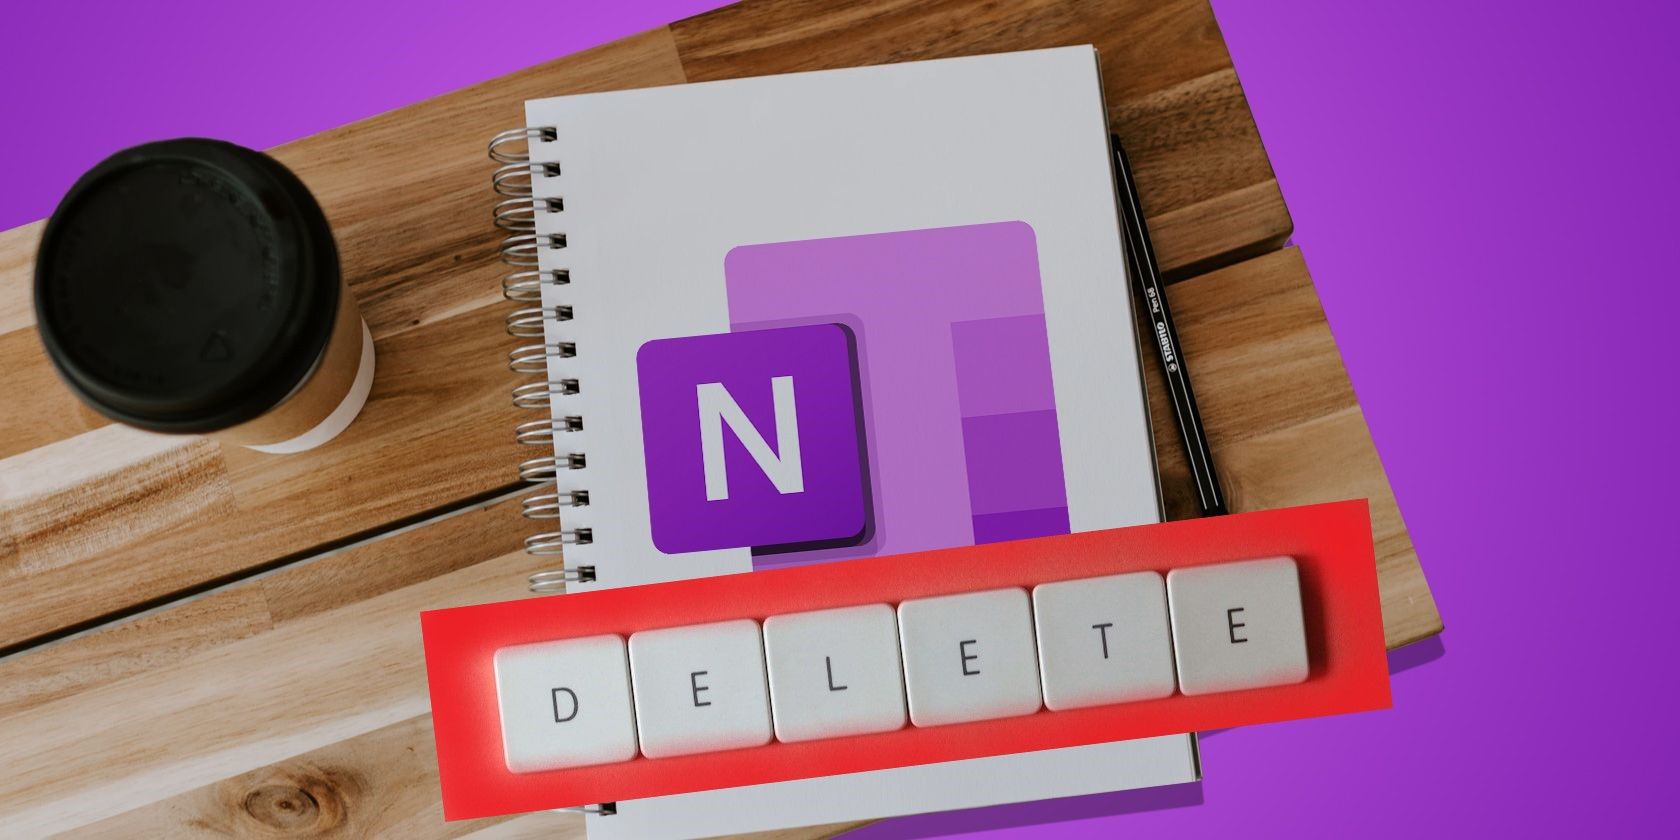 A Physical OneNote Notebook with Delete Written on it